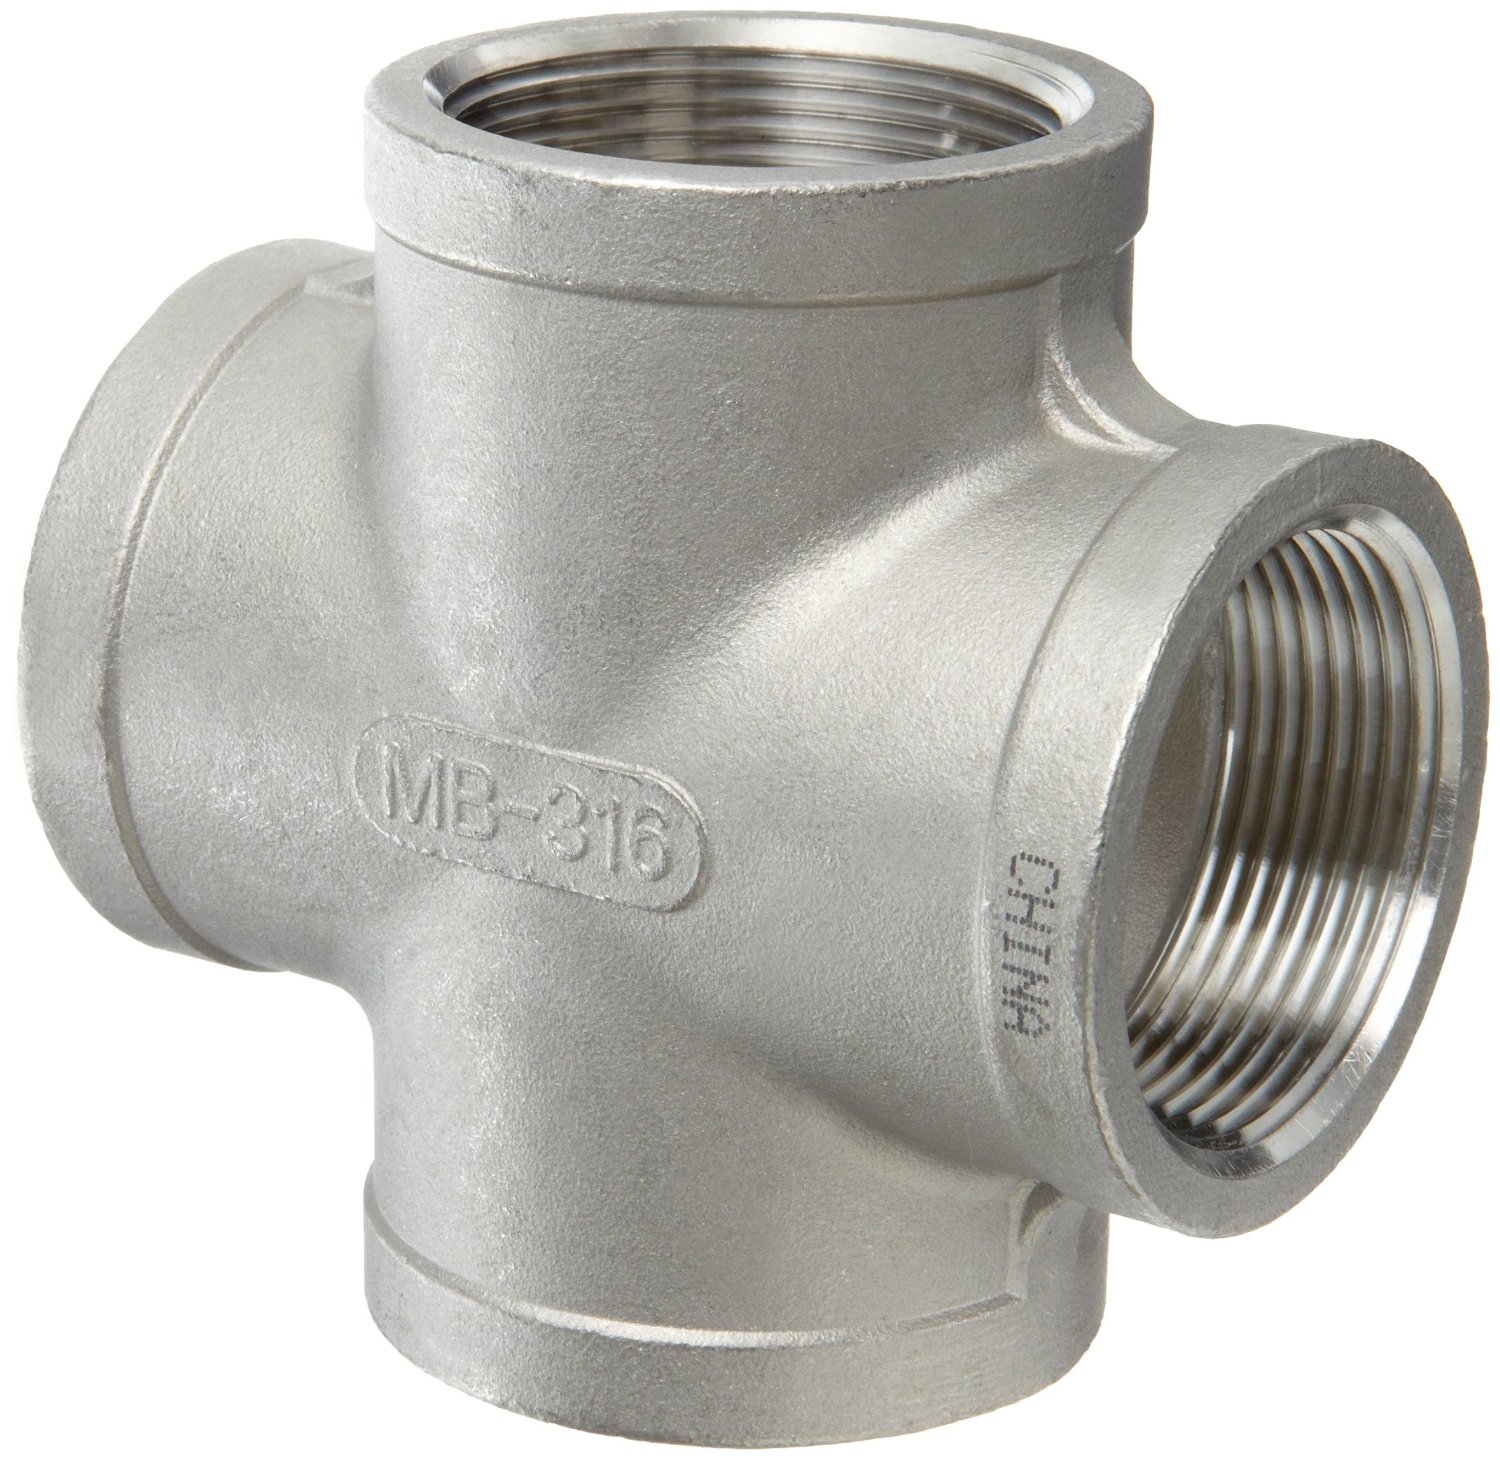 Stainless Steel 304 Cast Pipe Fitting, Cross, Class 150, 1/4" NPT Female